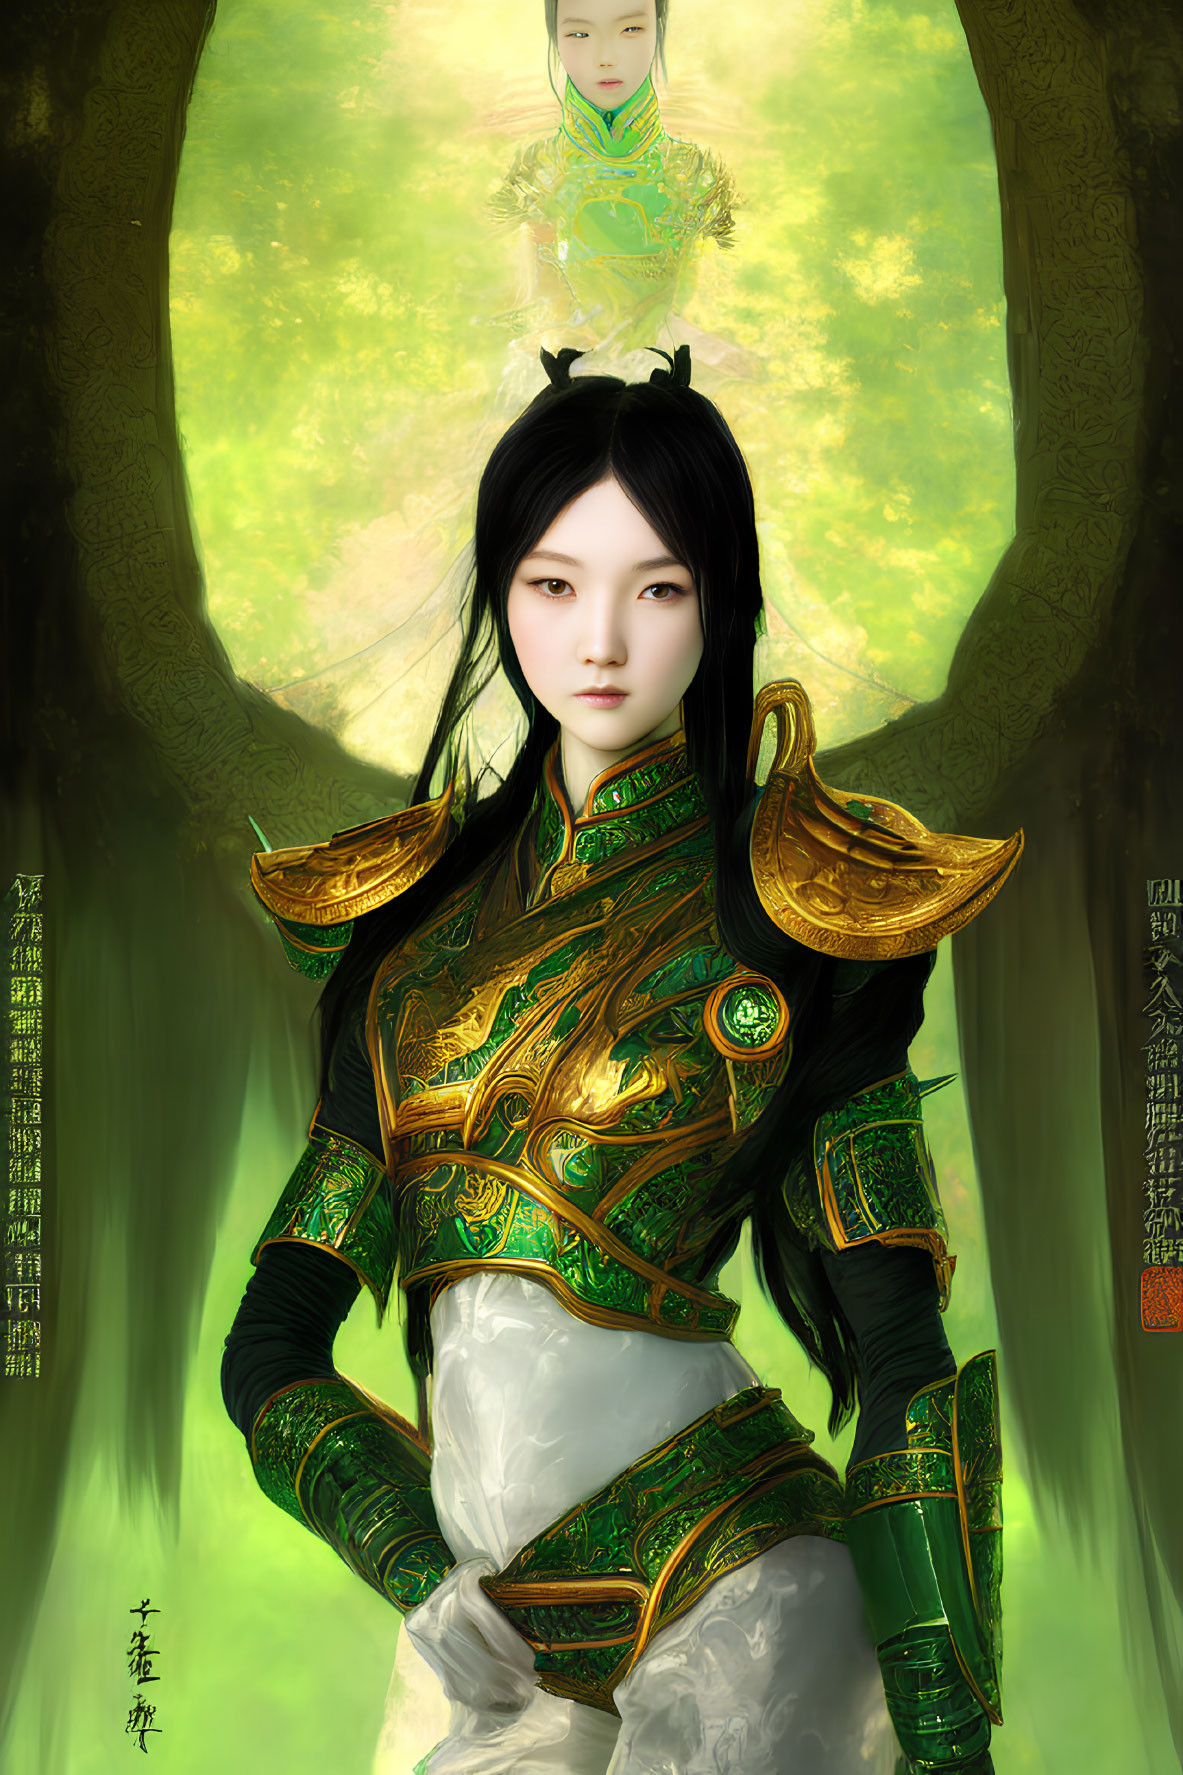 Digital illustration of woman in green-and-gold armor in mystical forest with script and smaller figure.